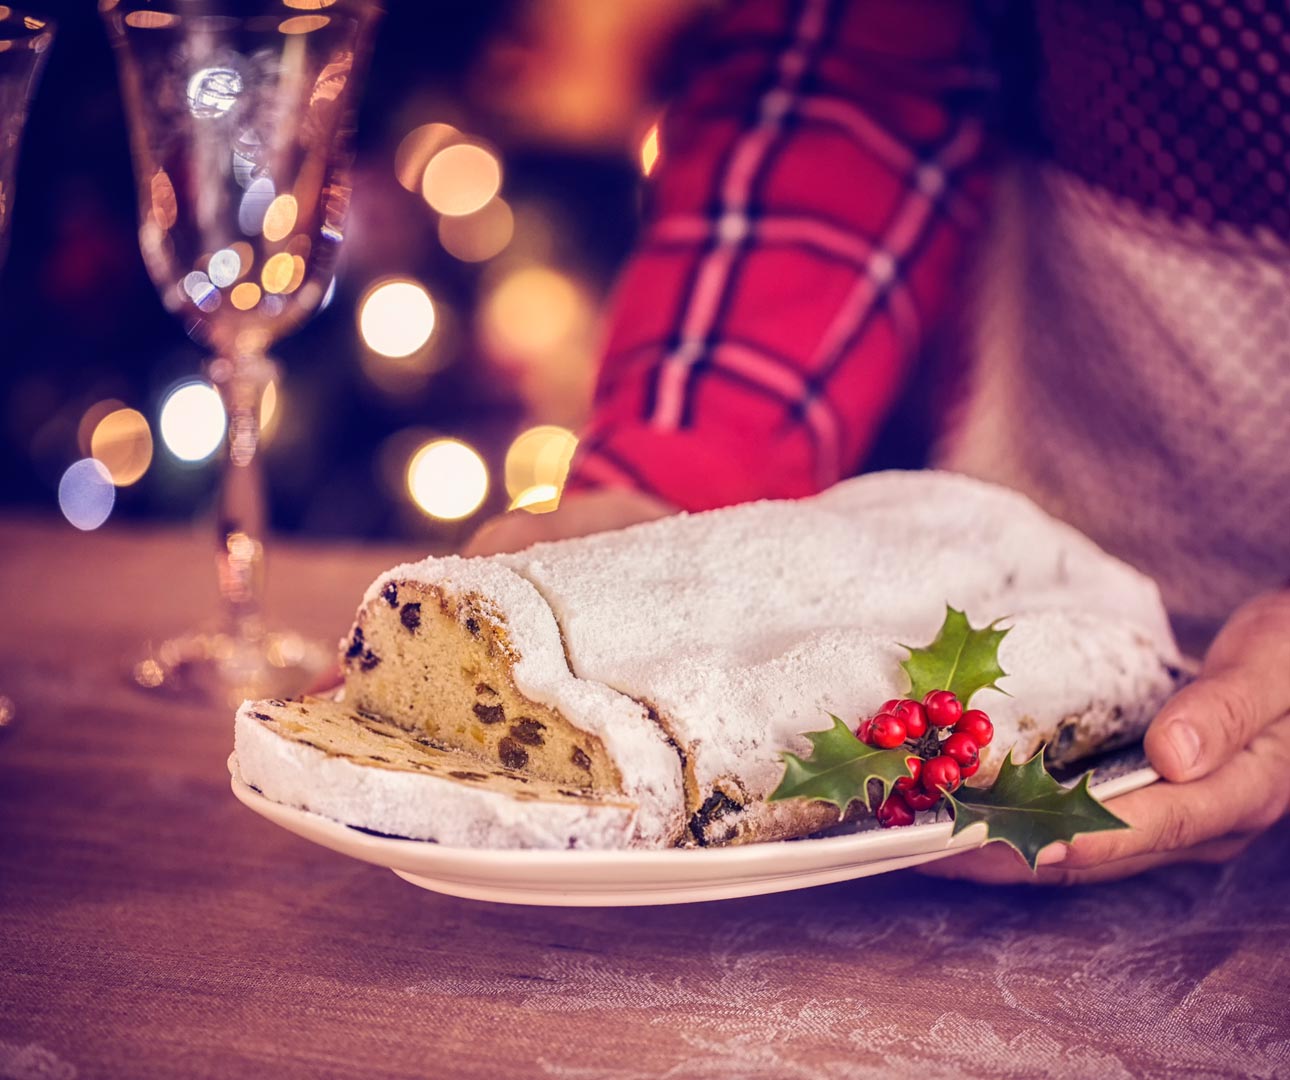 Eight Festive Foods From Around The World